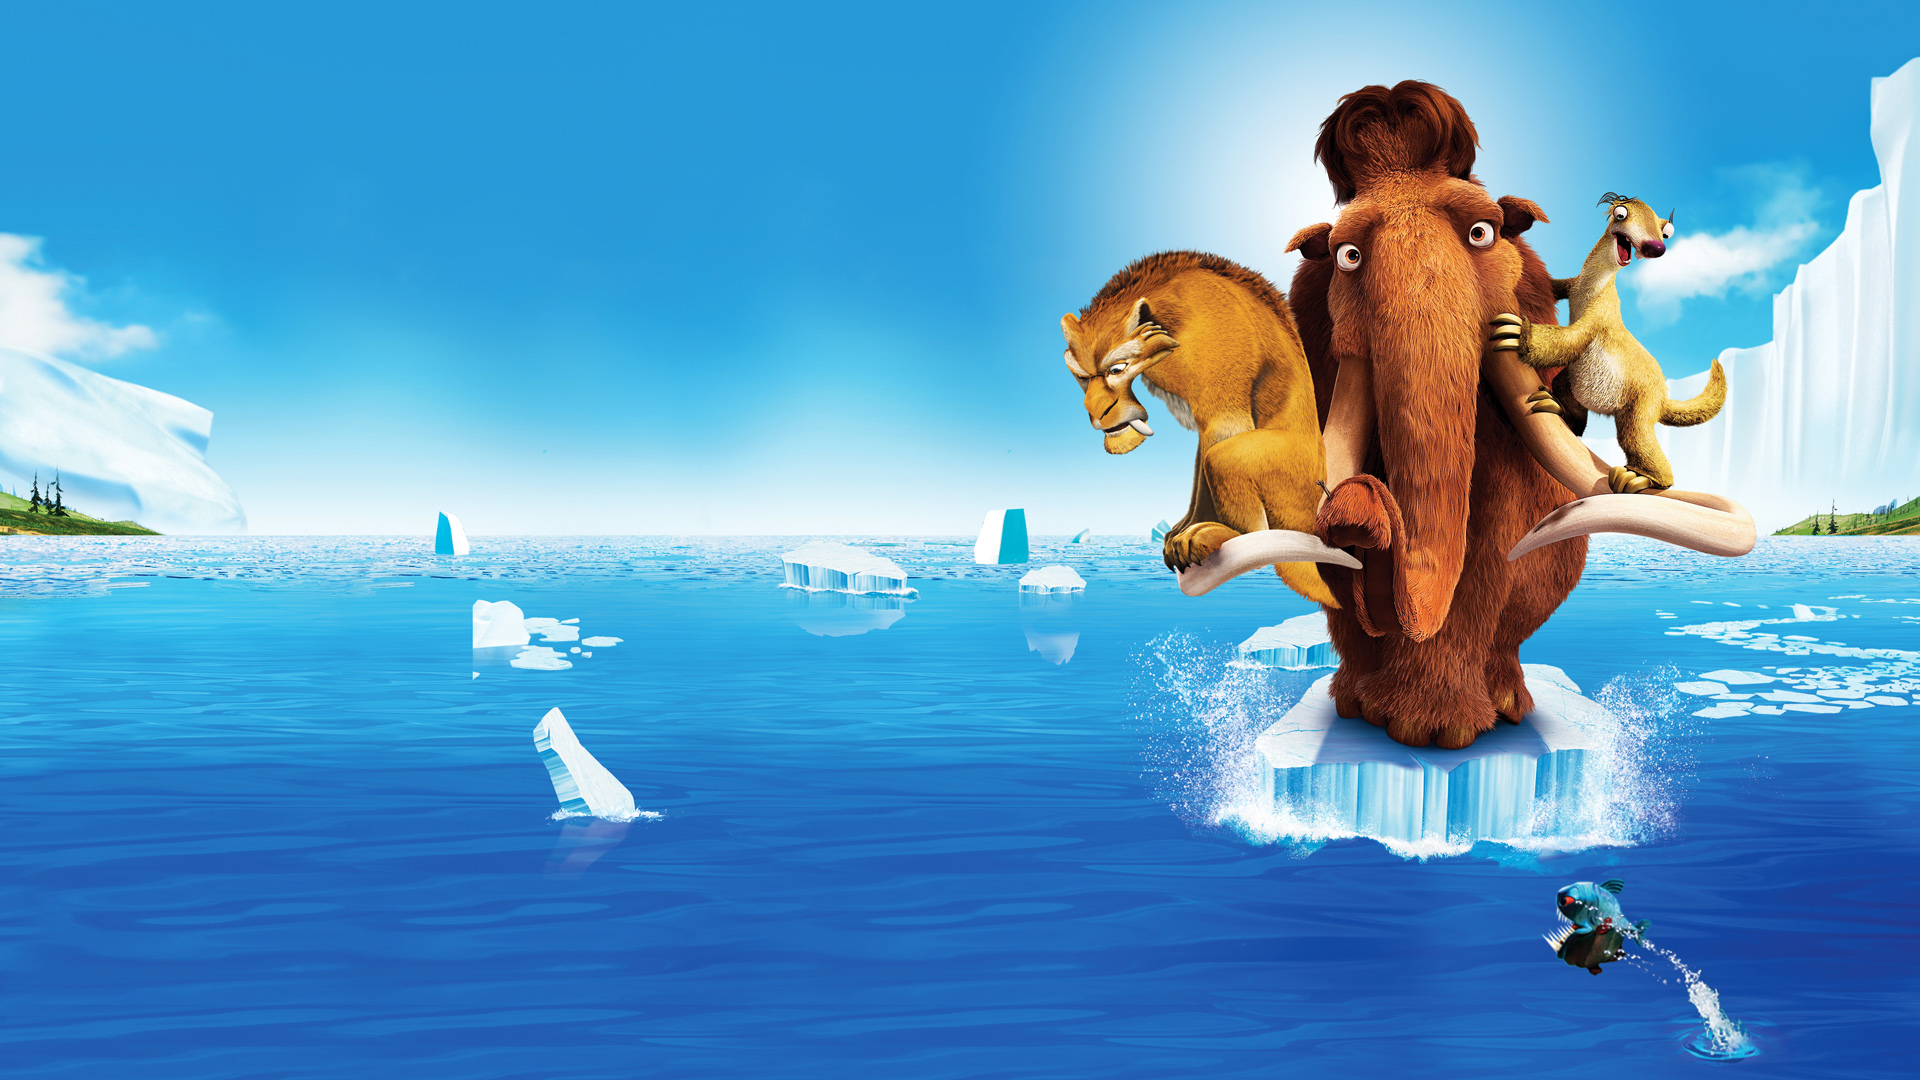 Ice Age: Continental Drift Wallpapers, Pictures, Images